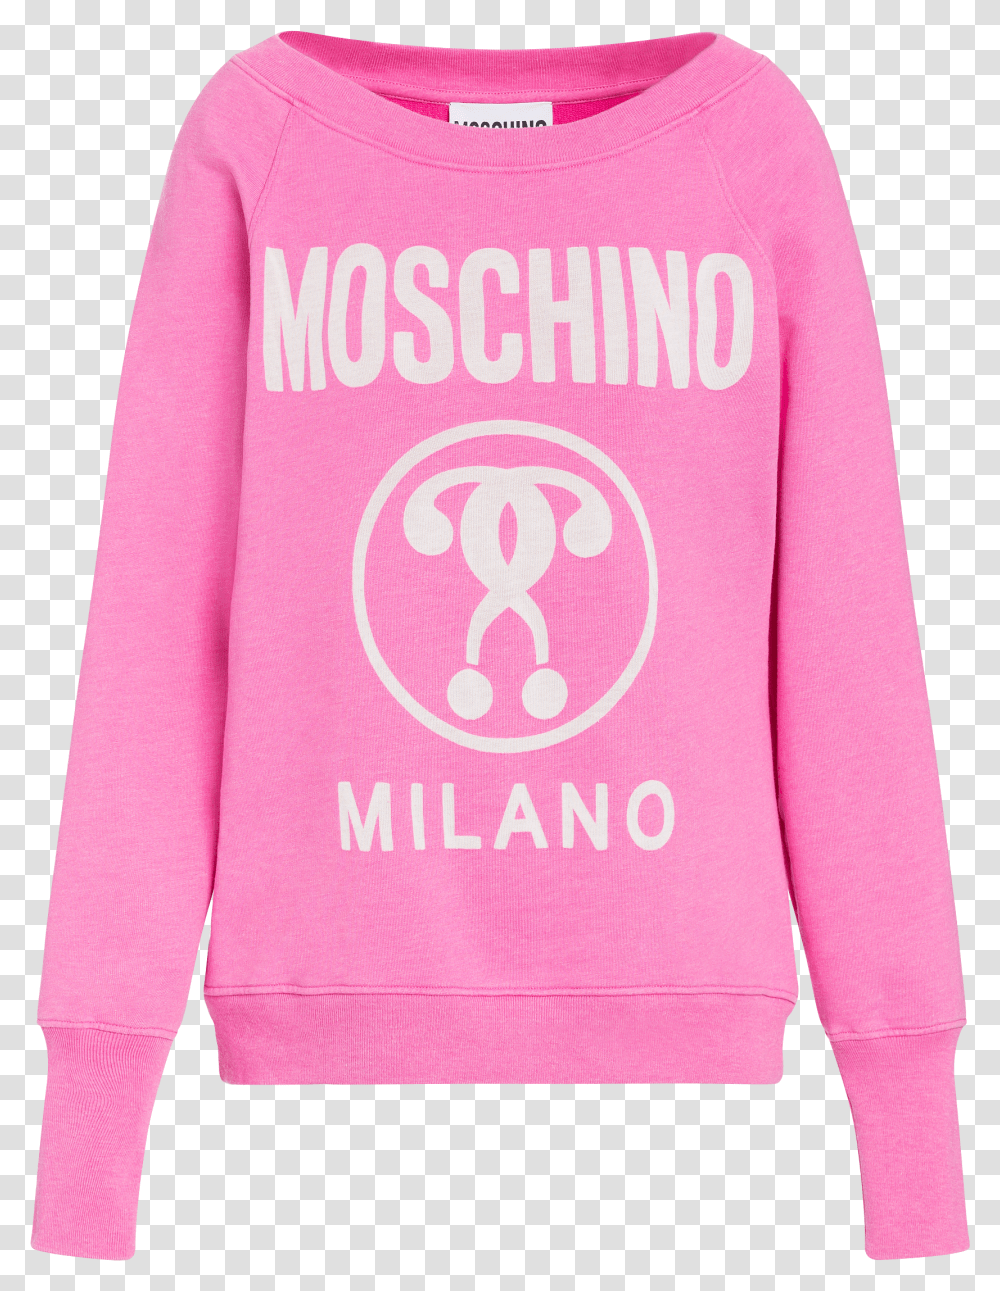 Moschino Black And Red Sweatshirt Transparent Png